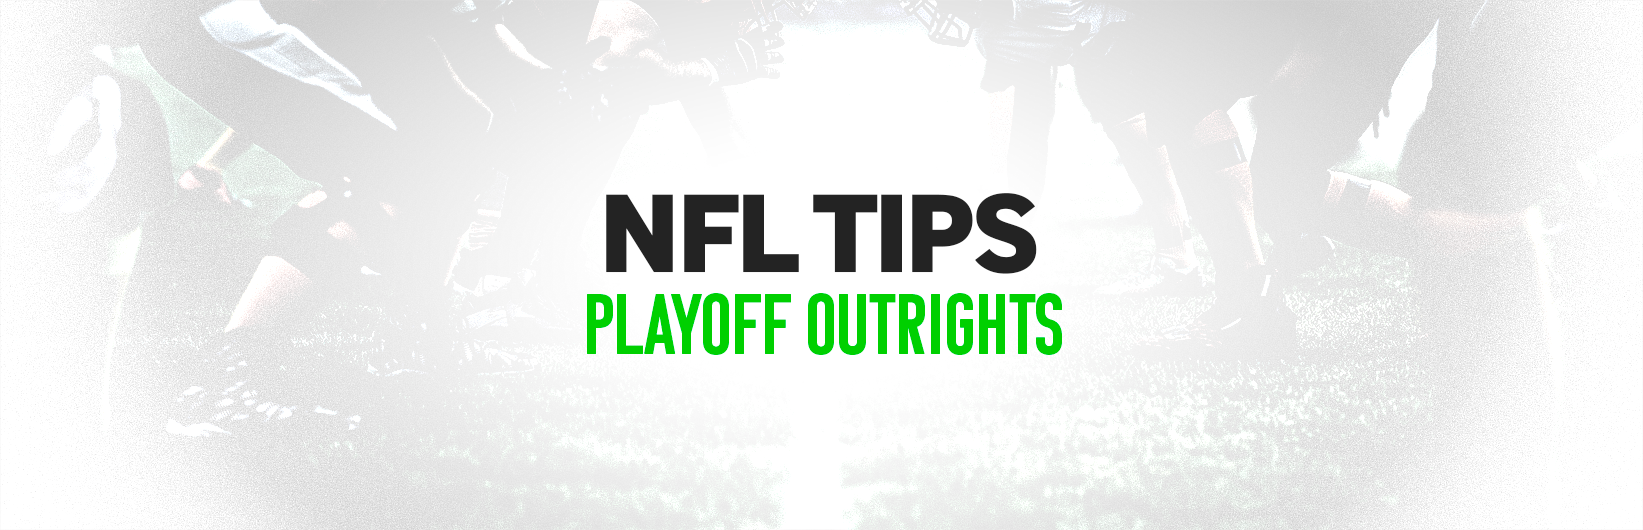 NFL tips: Best outright bets for the playoffs